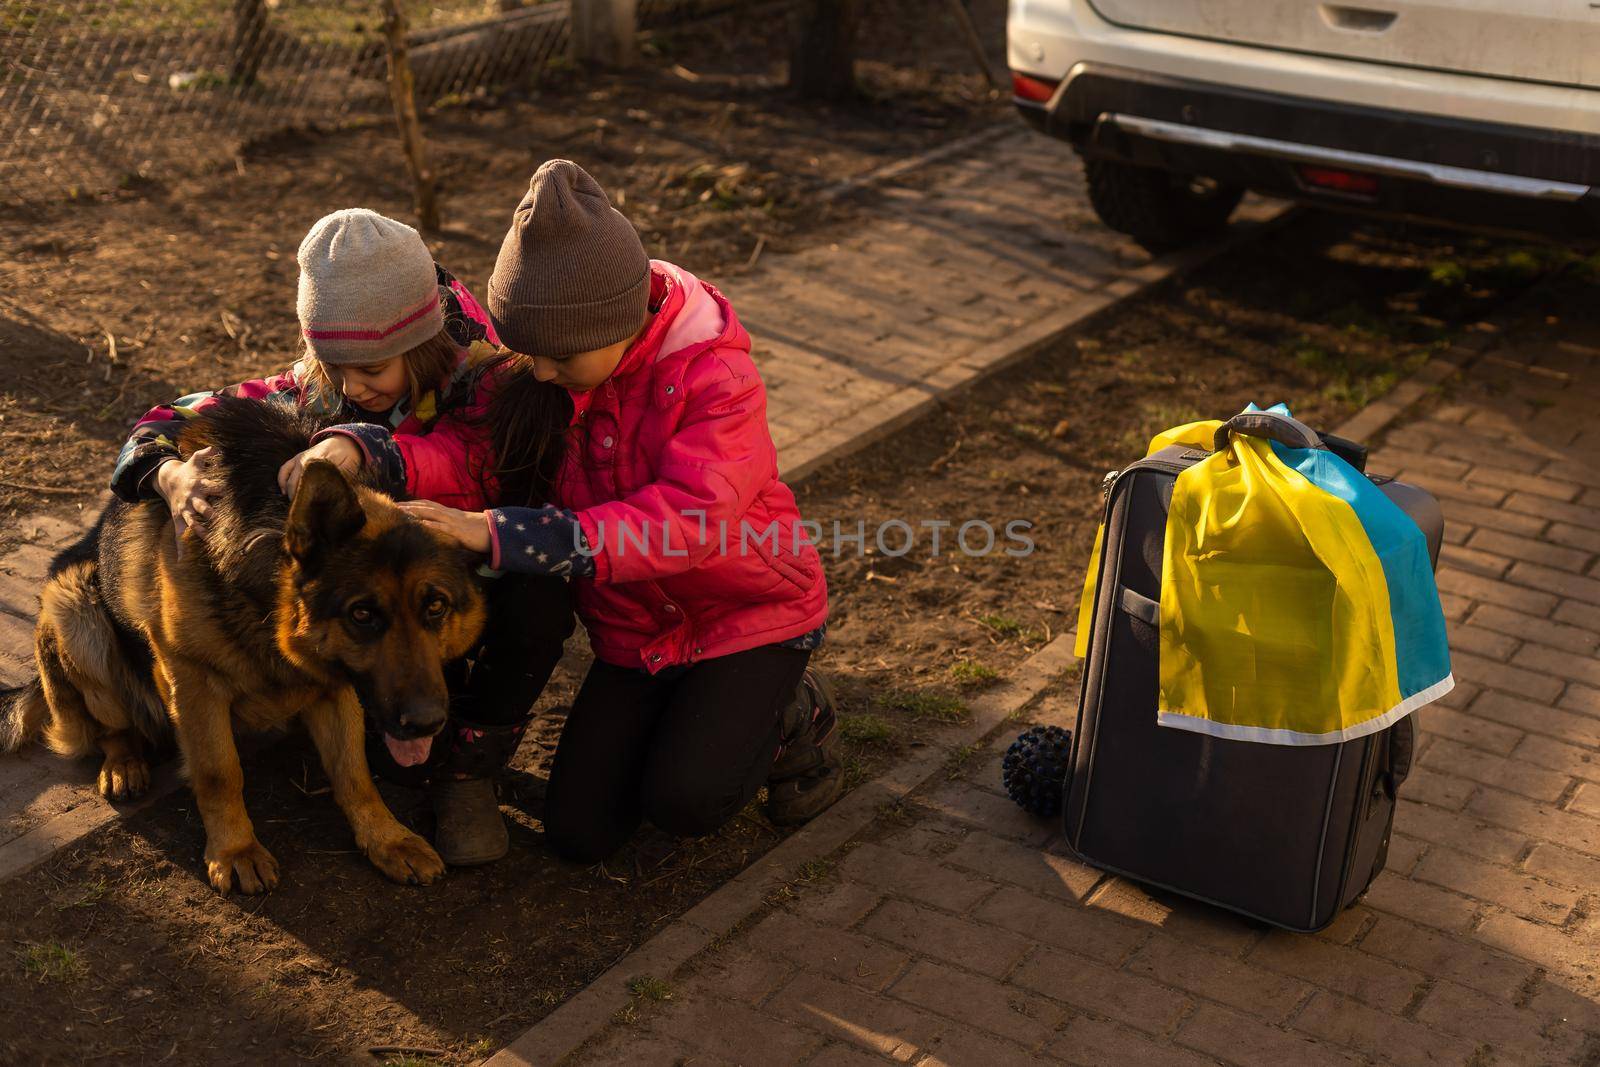 Ukraine military migration. two little girls with a suitcase. Flag of Ukraine, help. Crisis, military conflict.